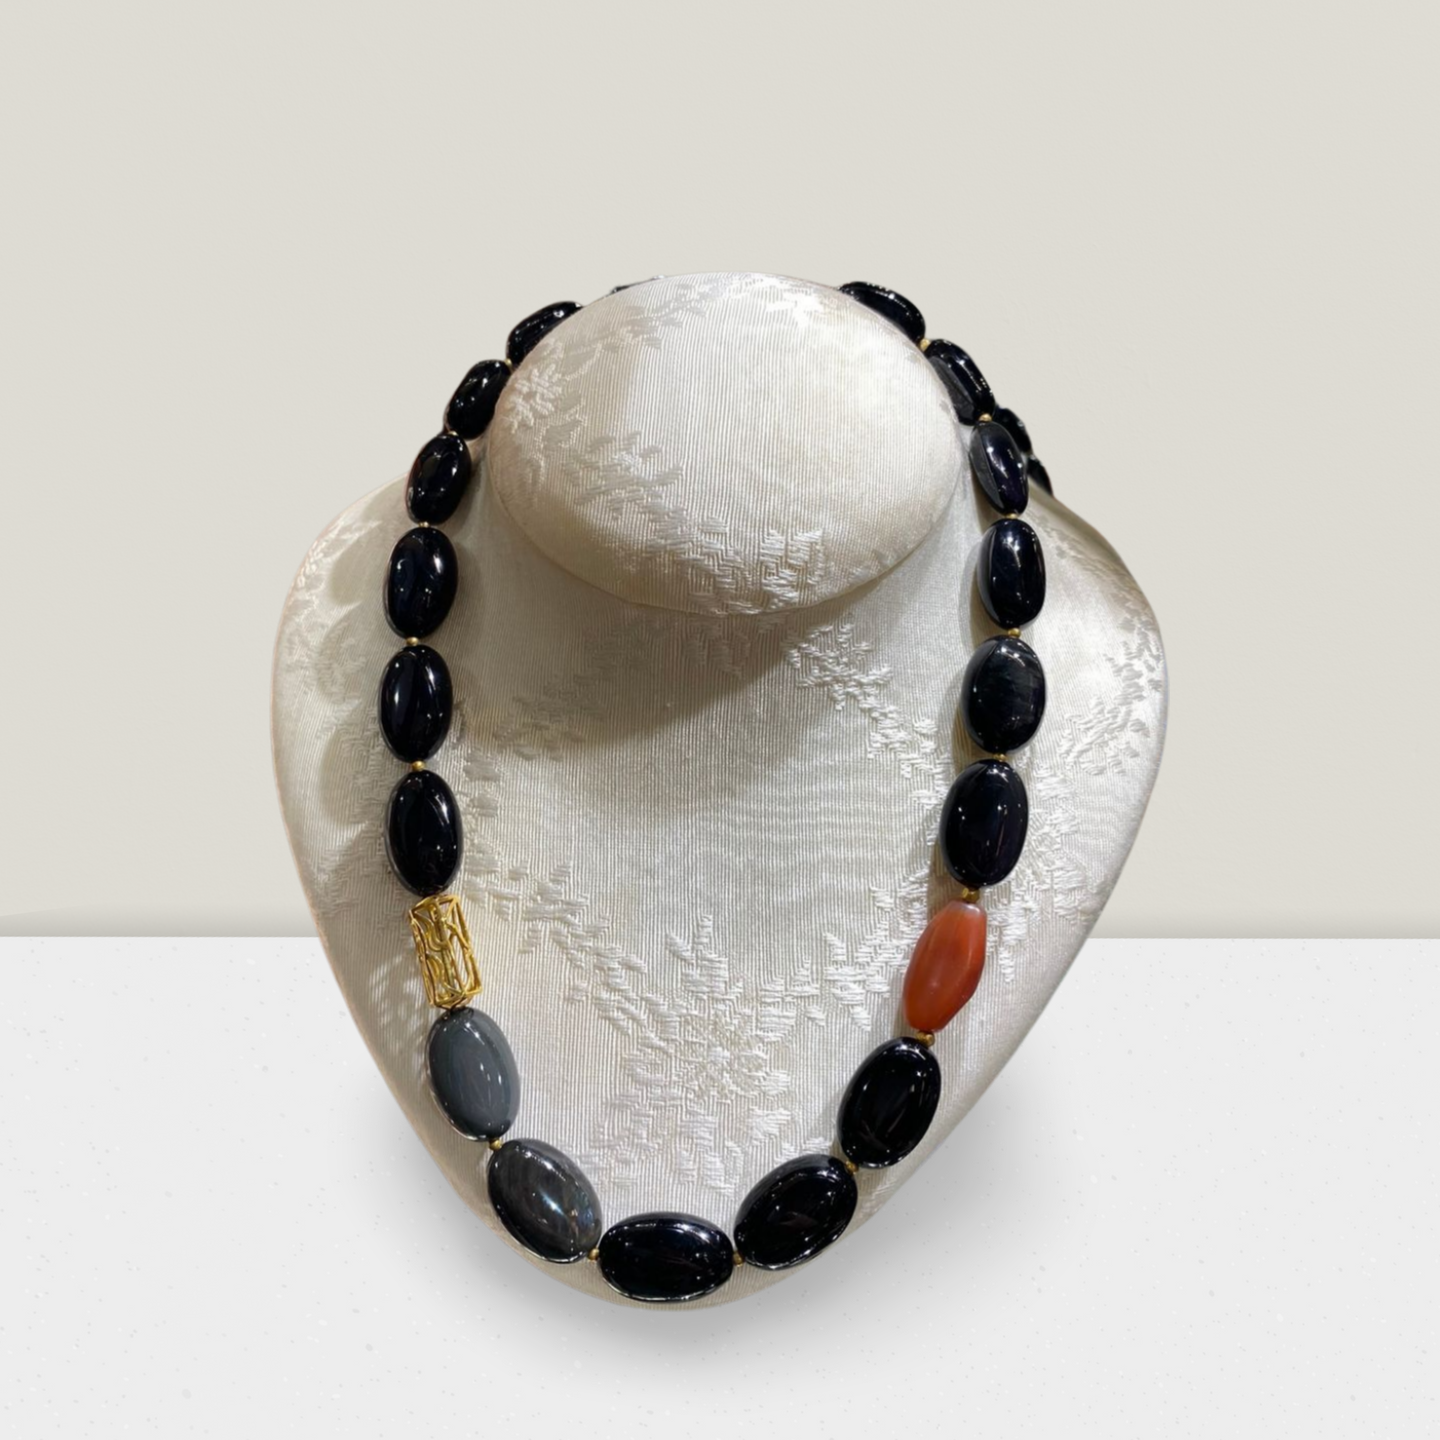 Necklace in Obsidian & Carnelian gemstones with 18k gold elements